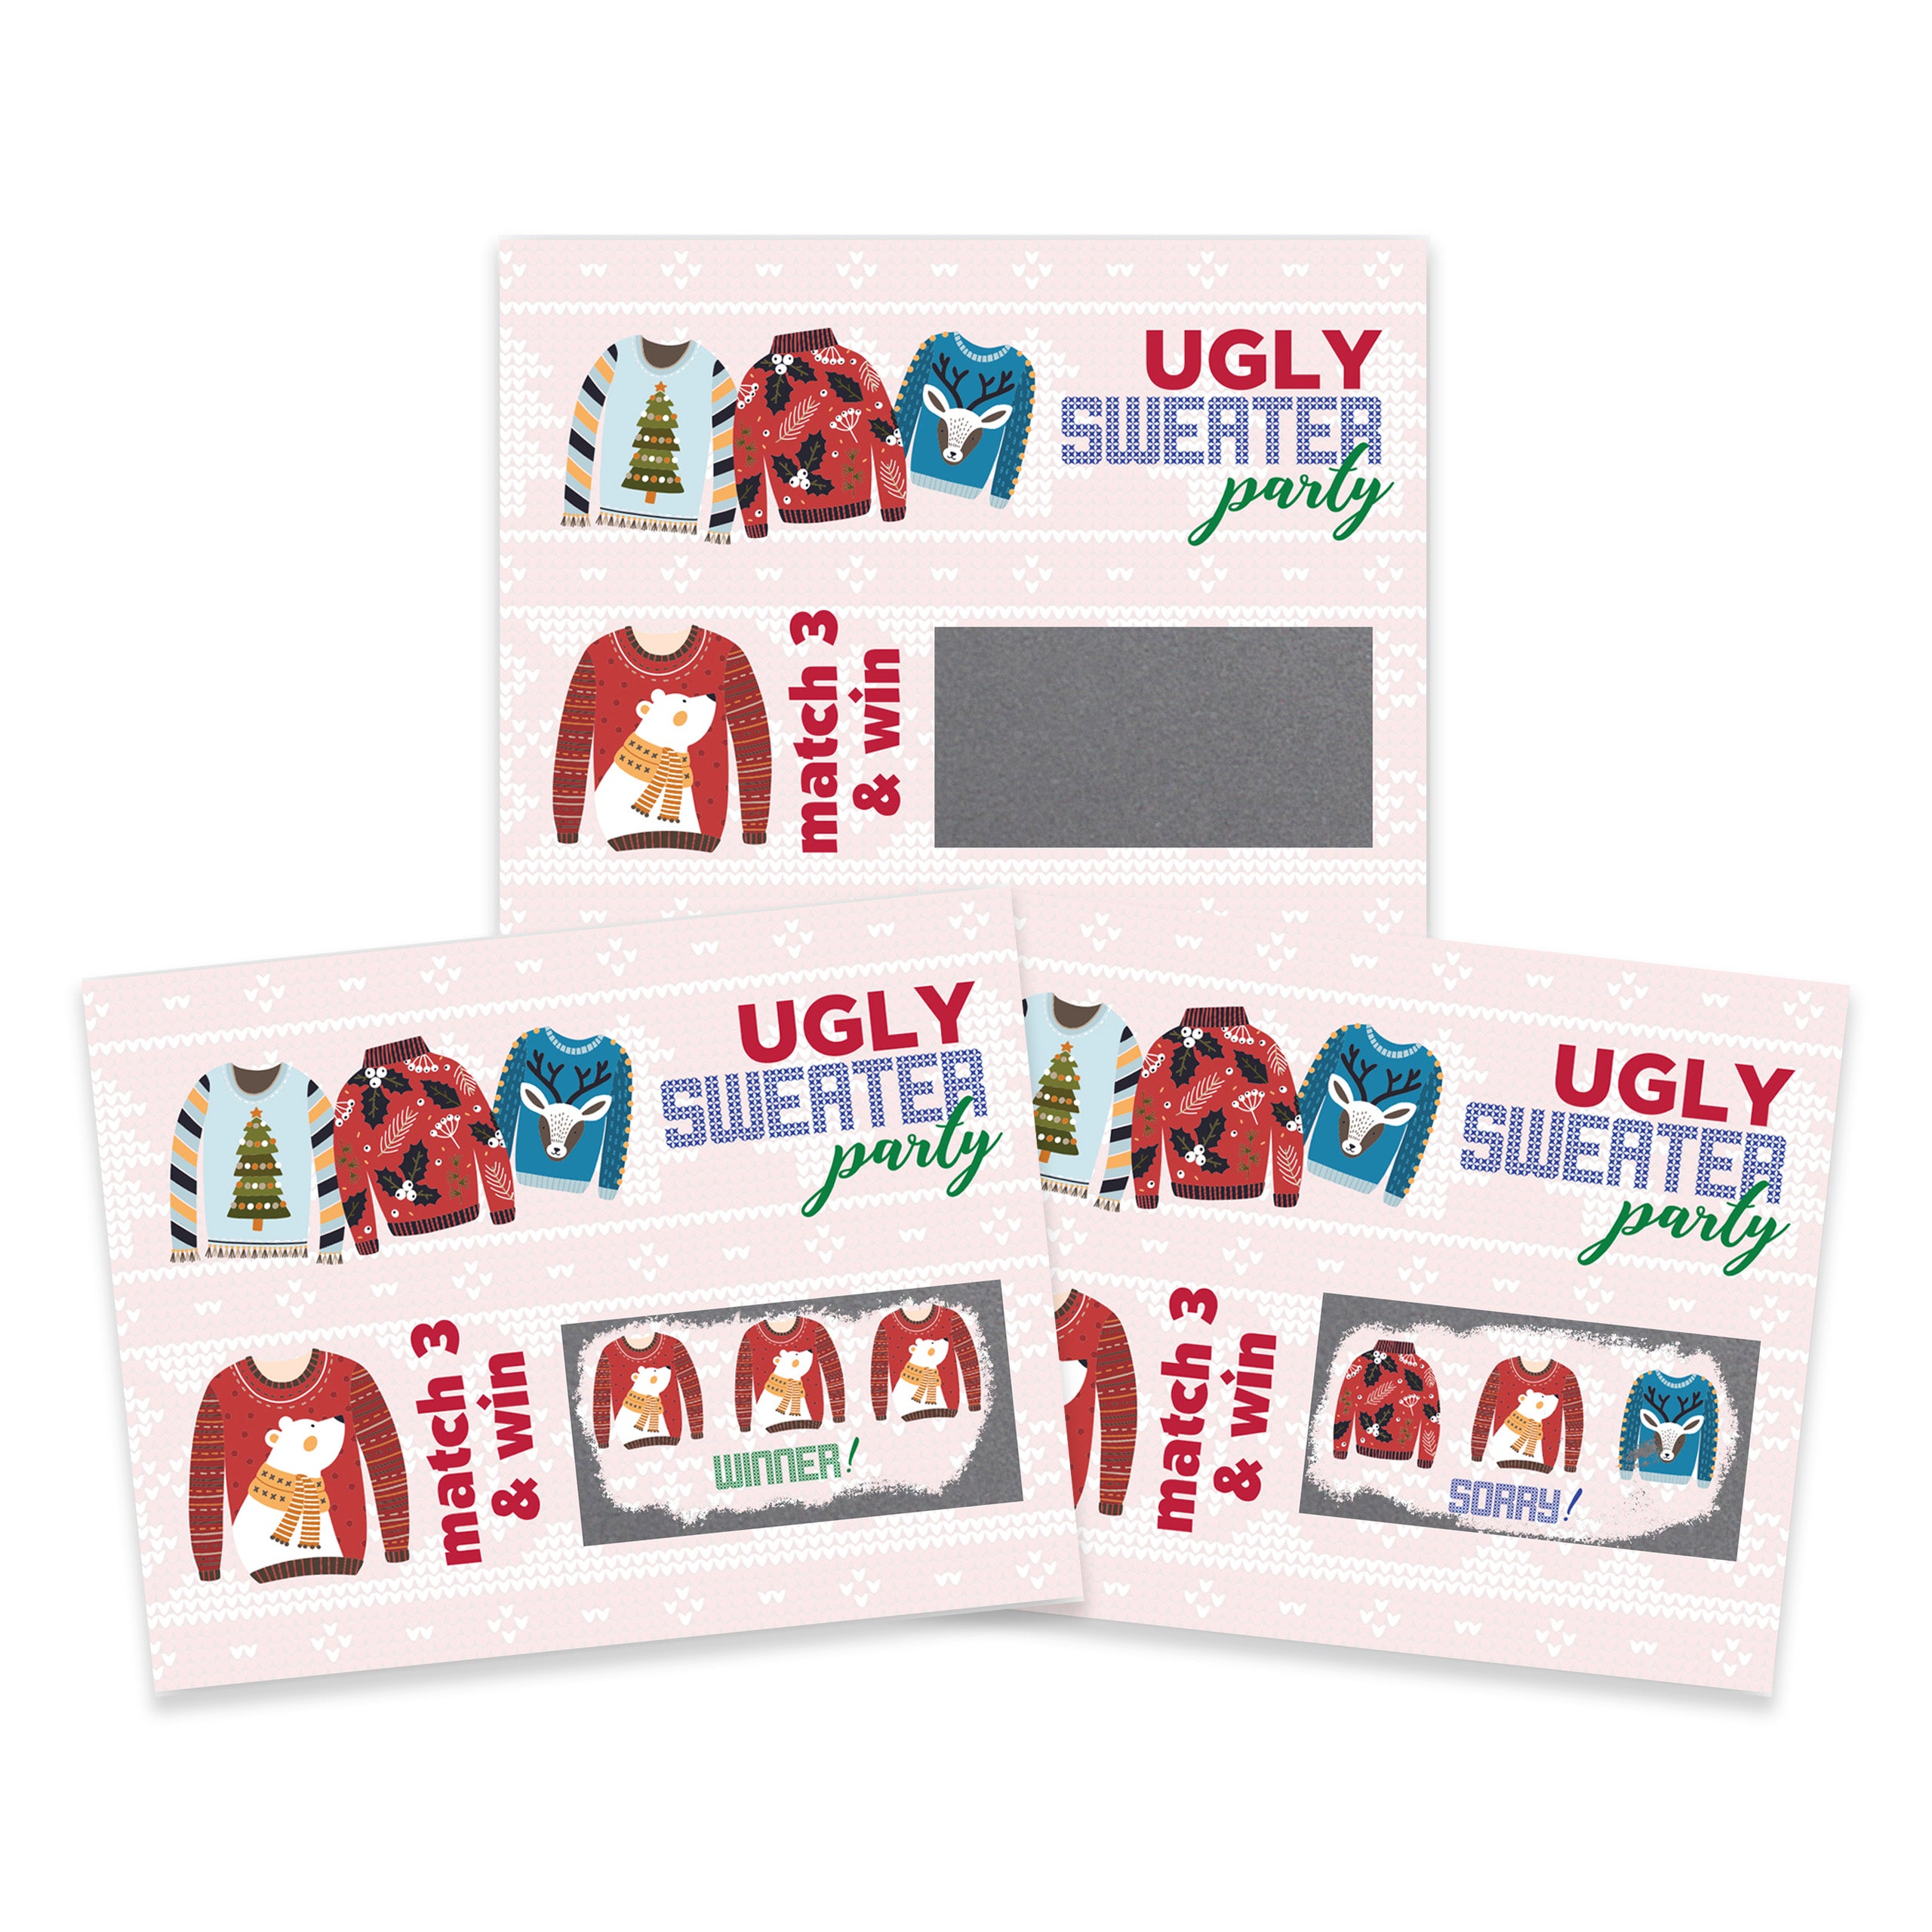 Holiday Ugly Sweater Scratch Off Game Card 26 Pack - 2 Winning and 24 Non-Winning Cards - My Scratch Offs